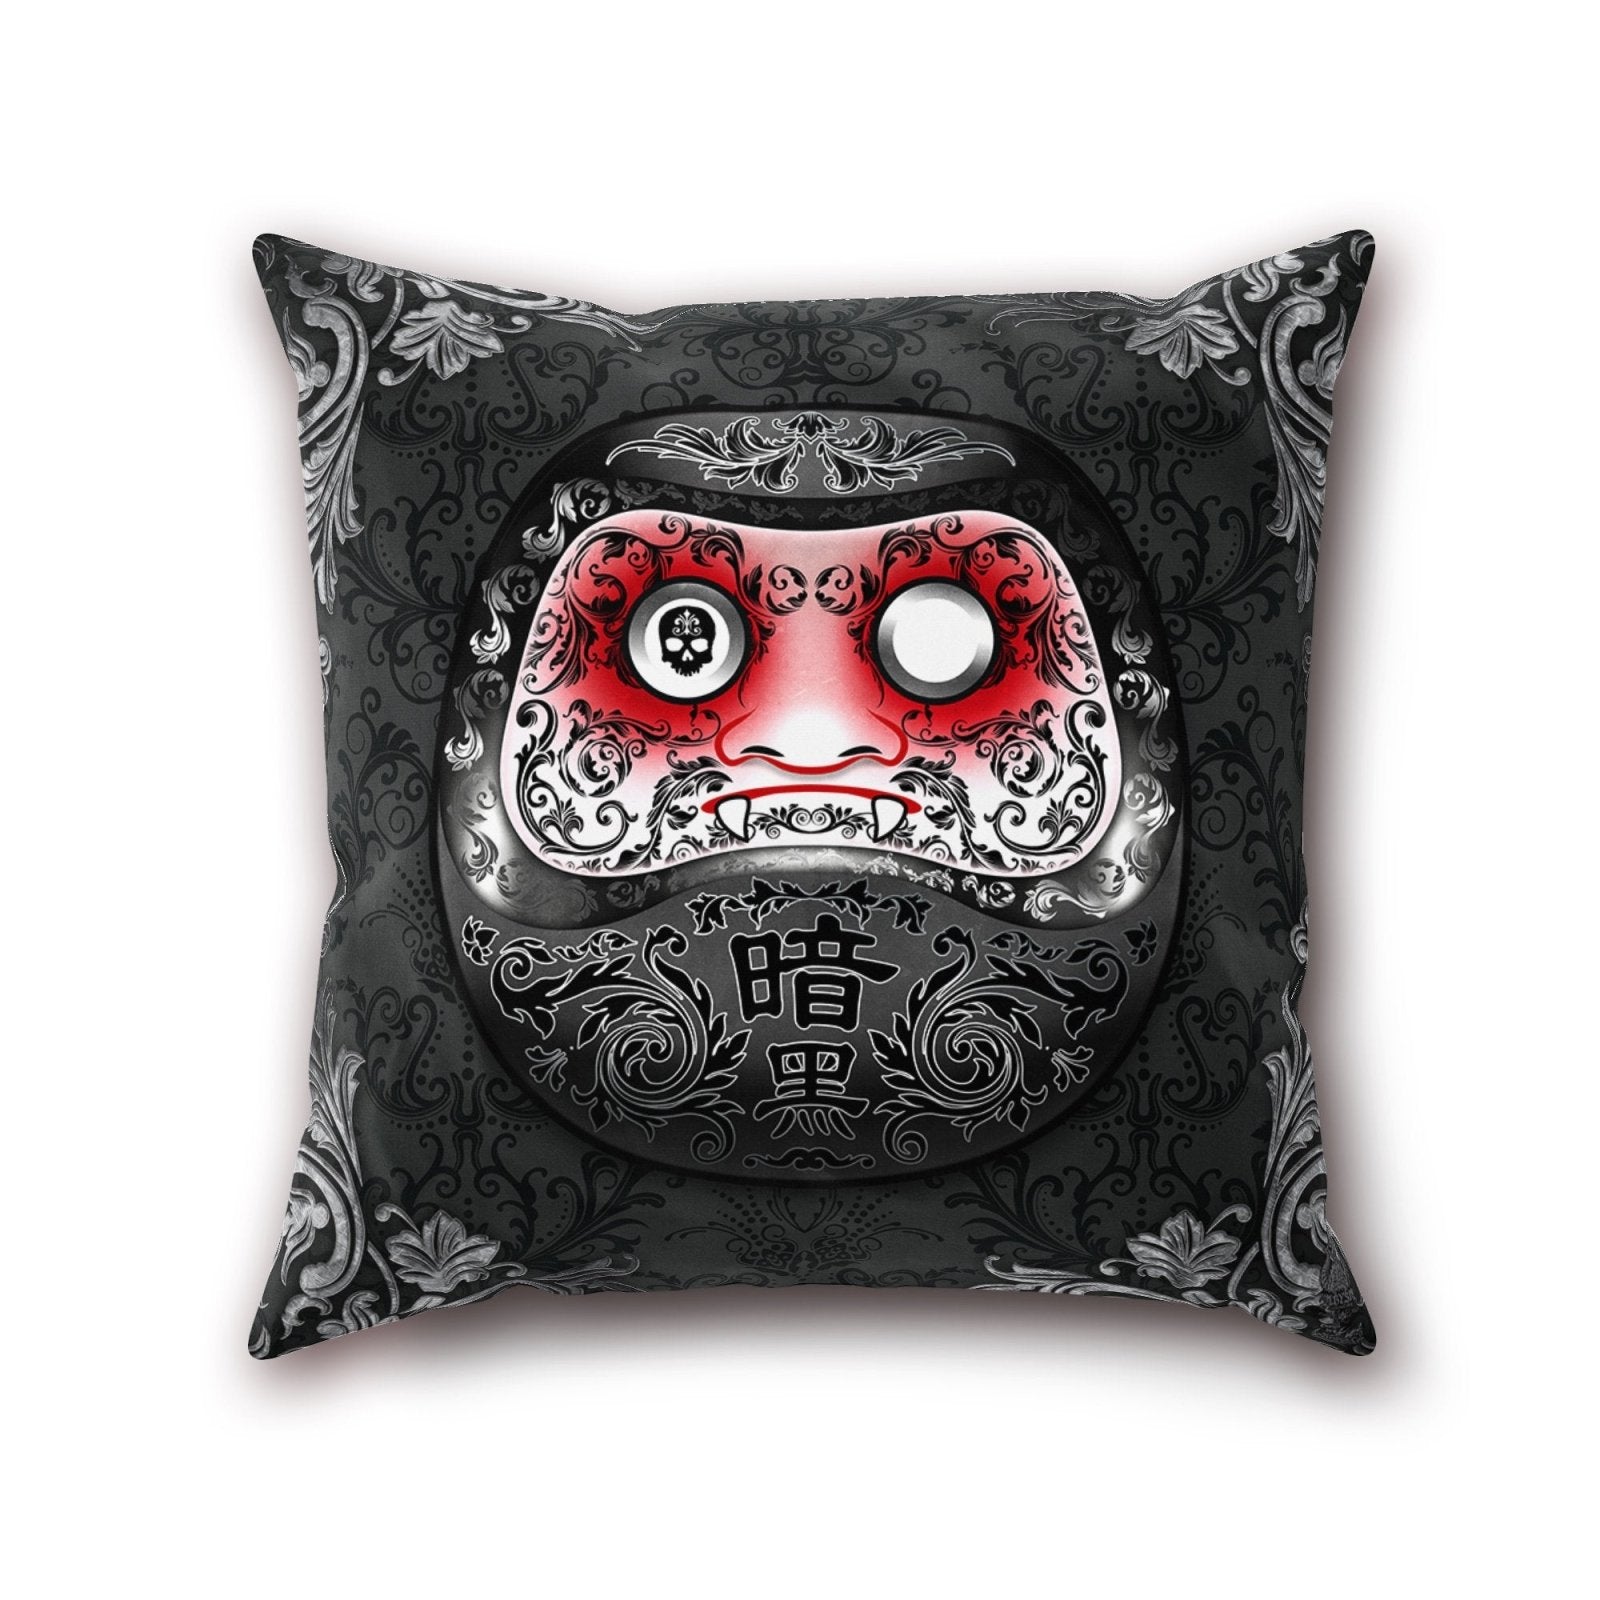 Surreal Pillow Case, Gothic Decor, Inmyeonjo - Oddities For Sale